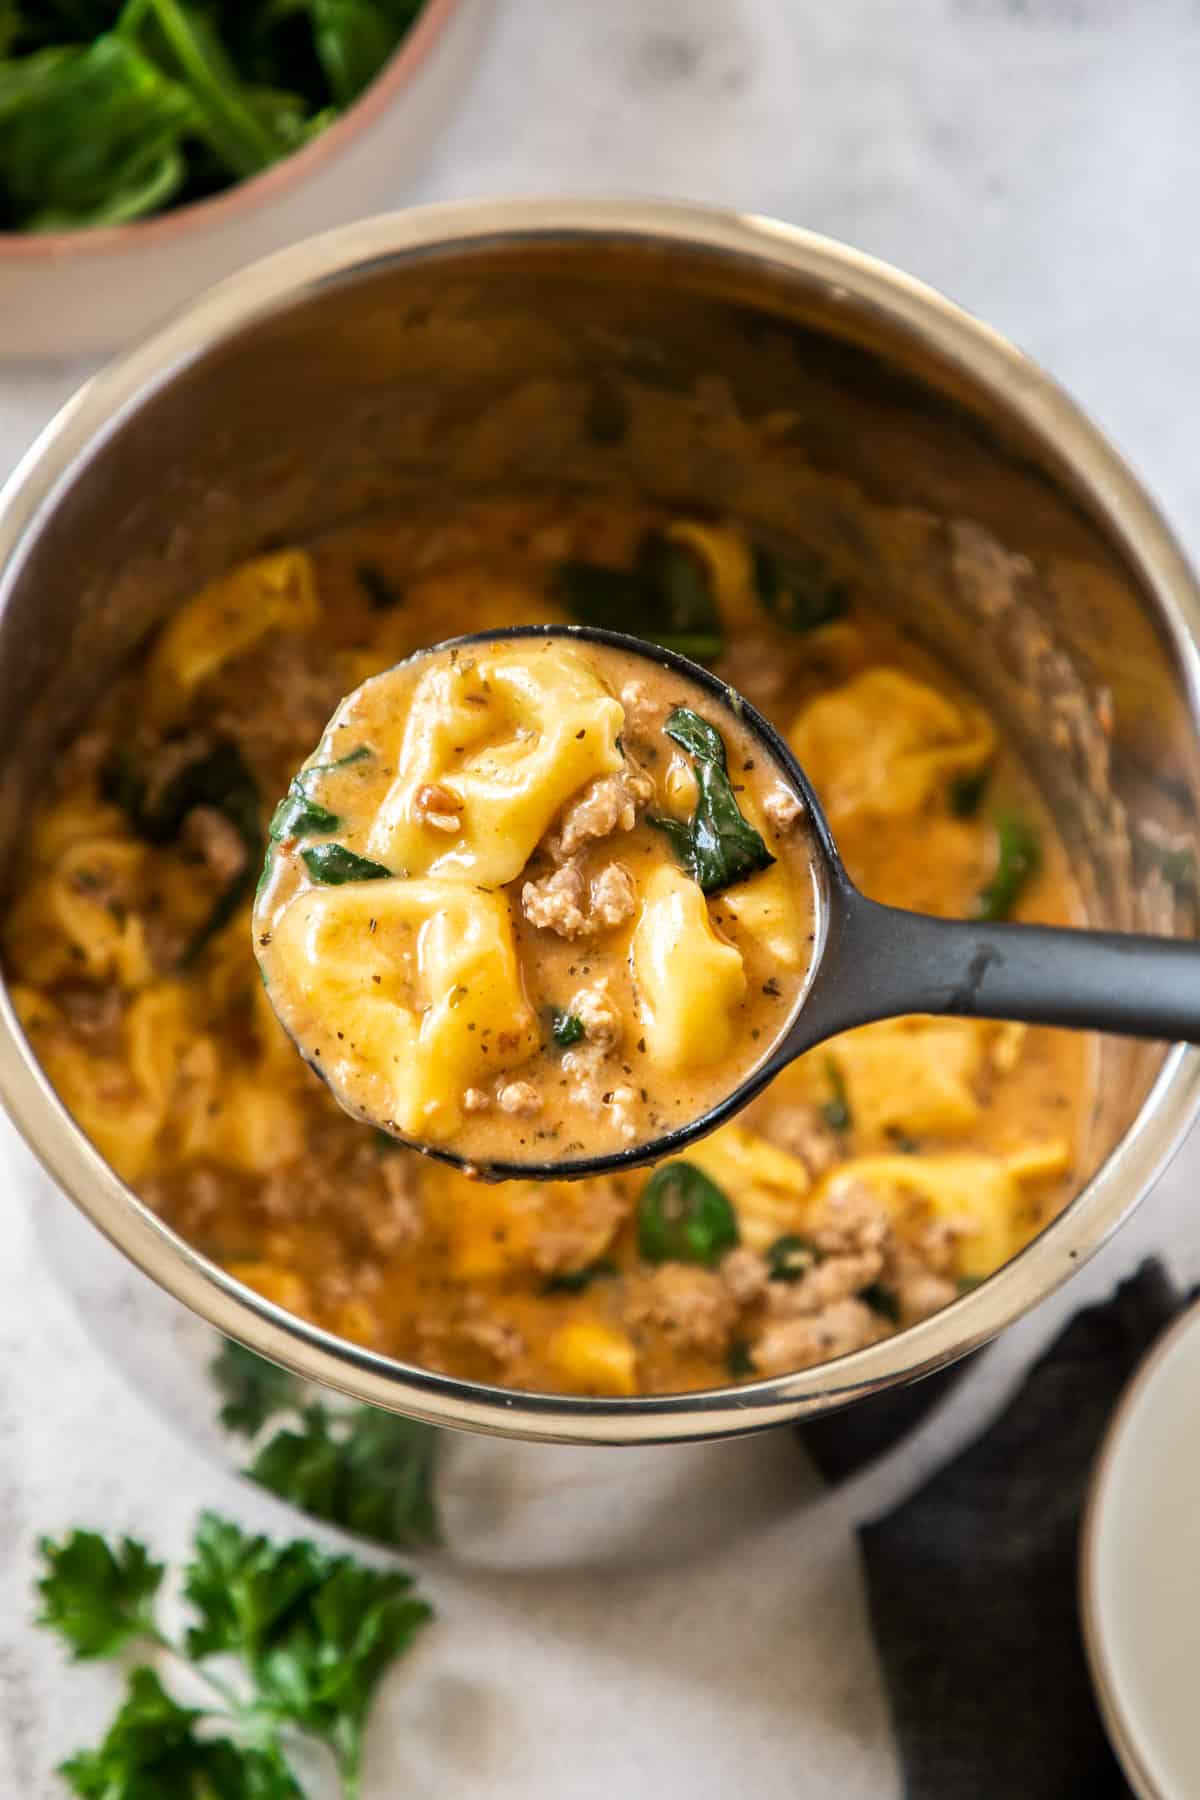 An Instant Pot full of Tortellini Soup with a ladle holding a scoop of the soup.